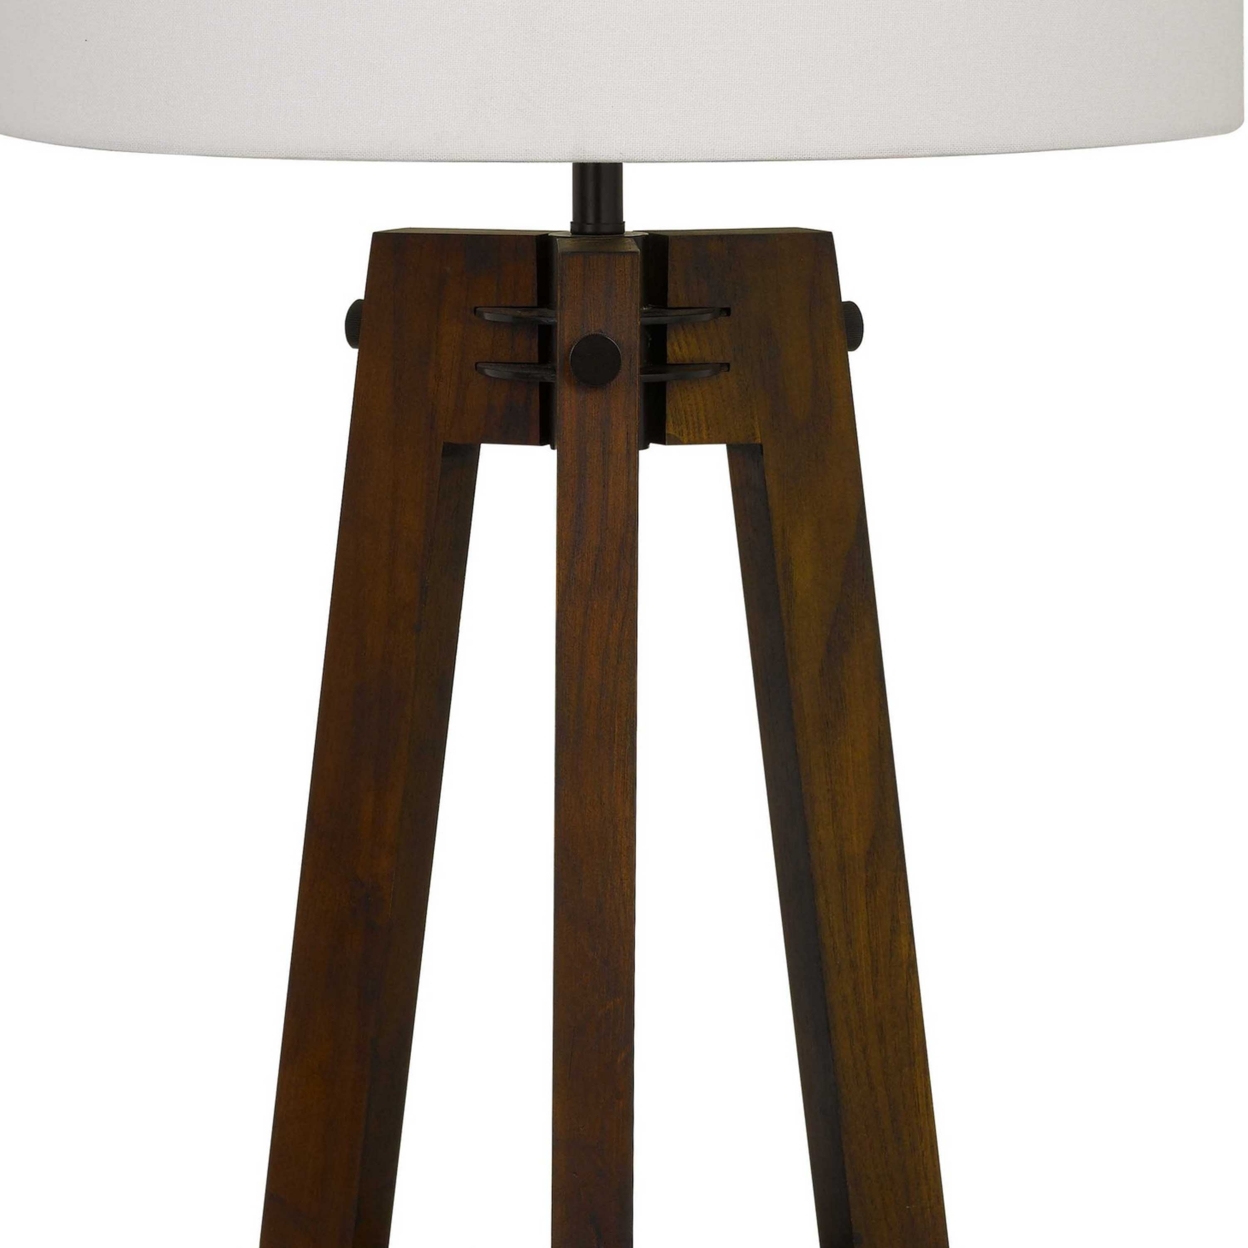 Drum Shade Table Lamp With Wooden Tripod Base, White And Brown- Saltoro Sherpi